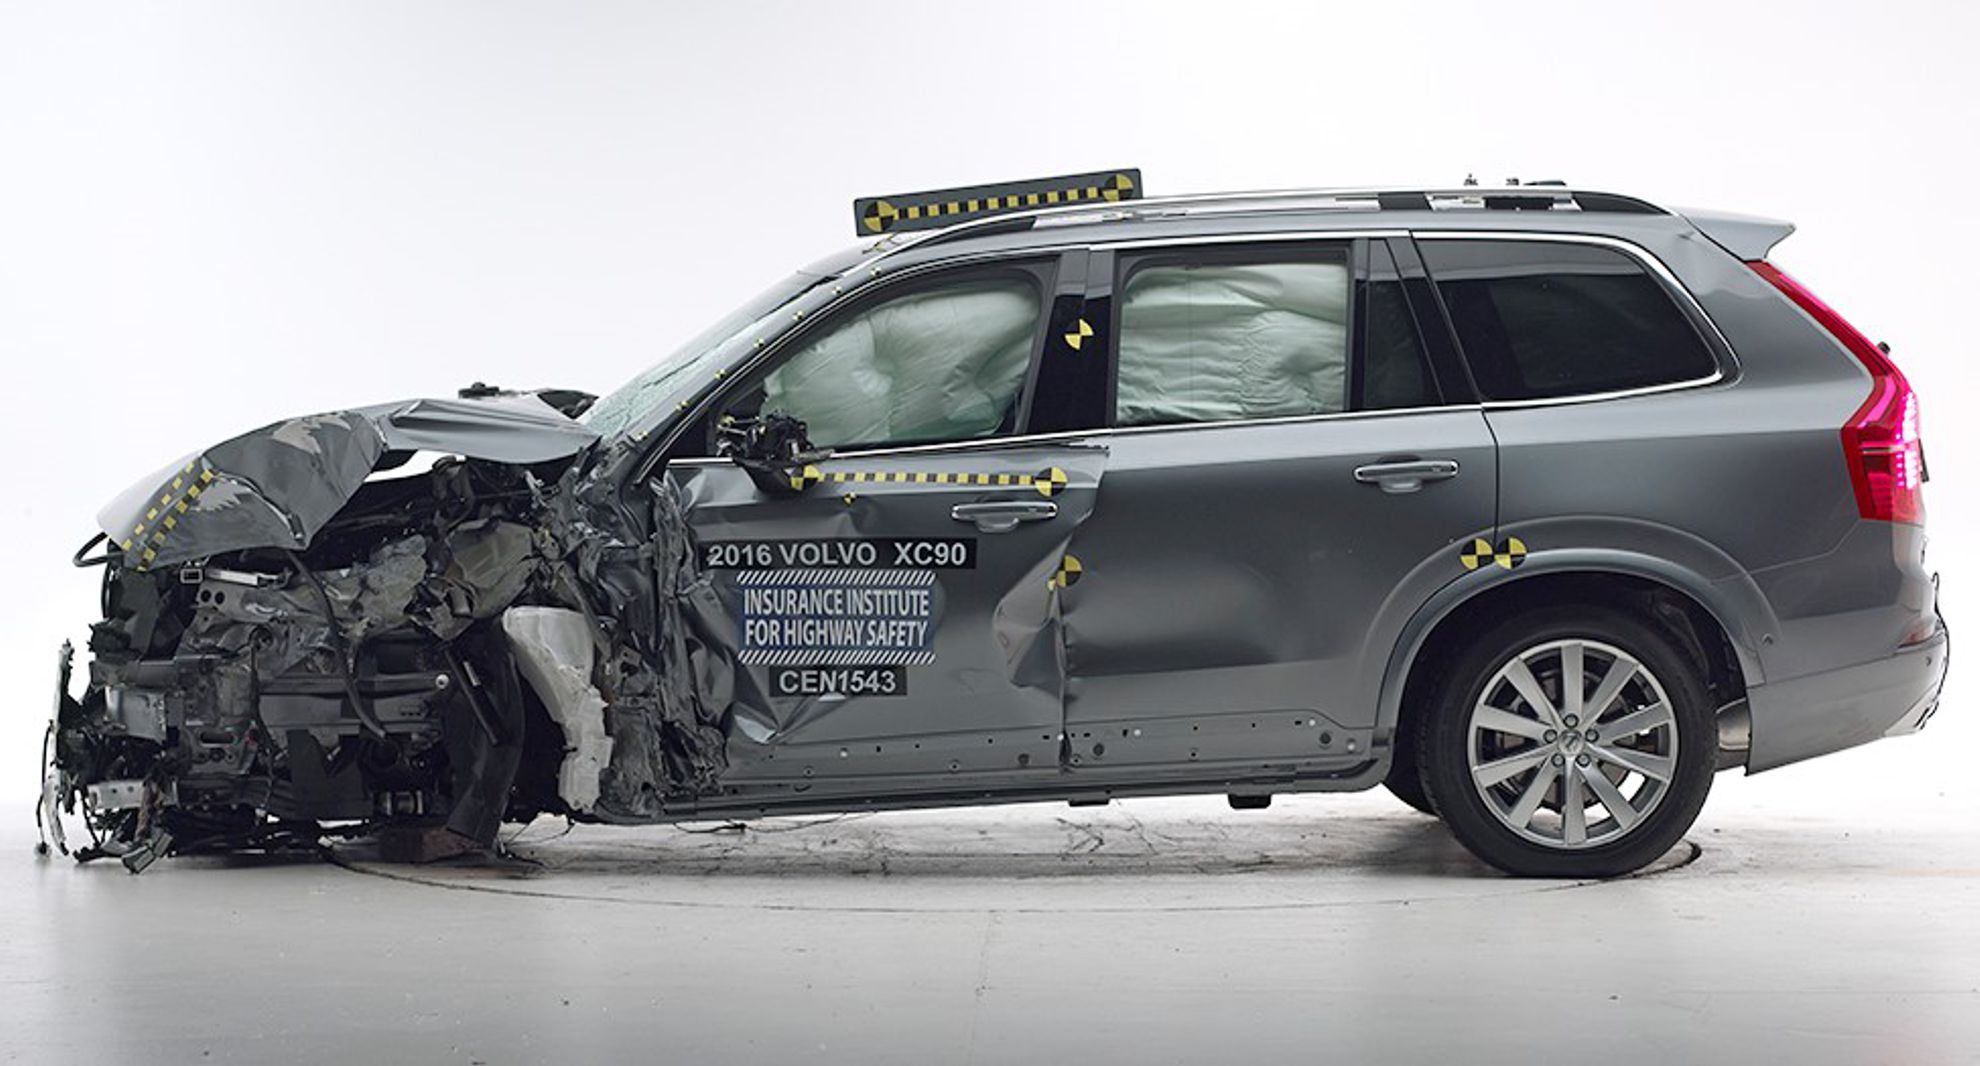 VOLVO XC90 AWARDED TOP SAFETY RATING BY IIHS